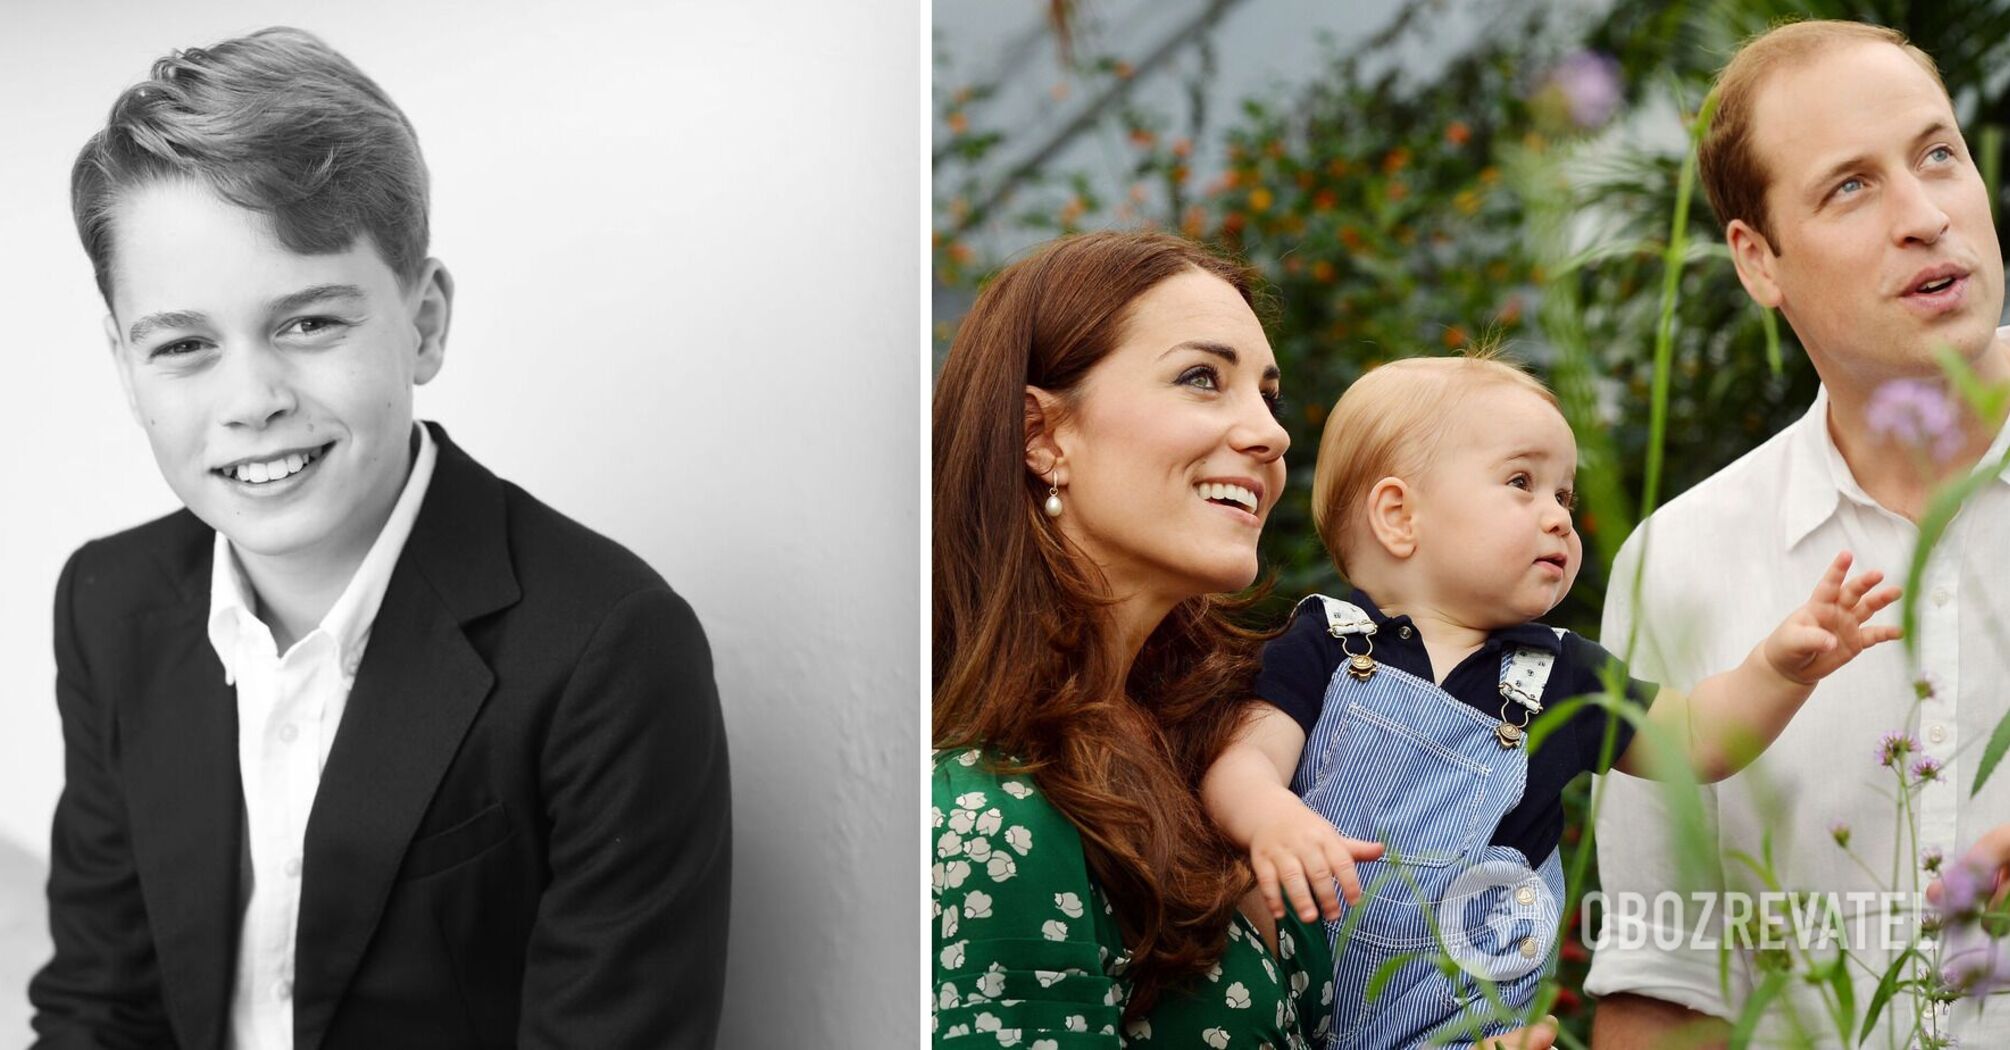 He is shy, like William. What traits did the birthday boy Prince George inherit from his parents?